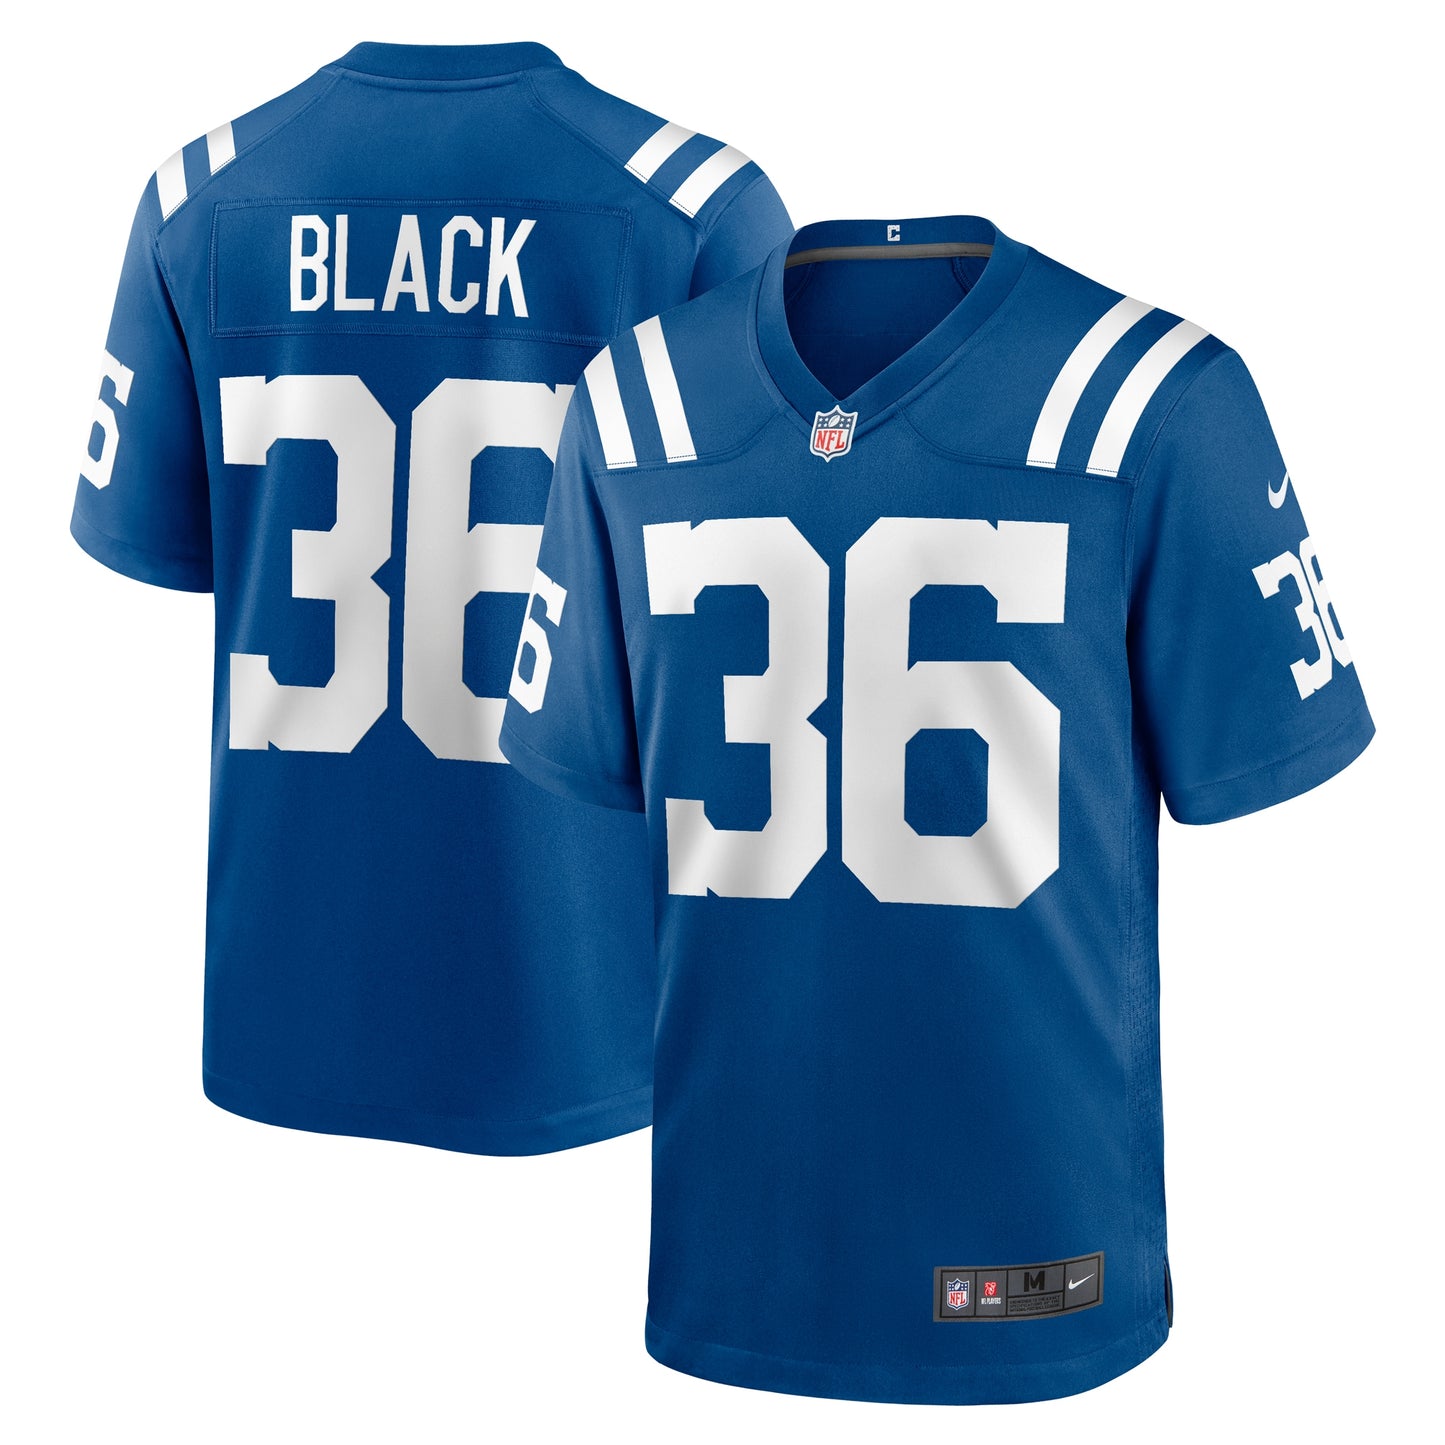 Henry Black Indianapolis Colts Nike Team Game Jersey - Royal